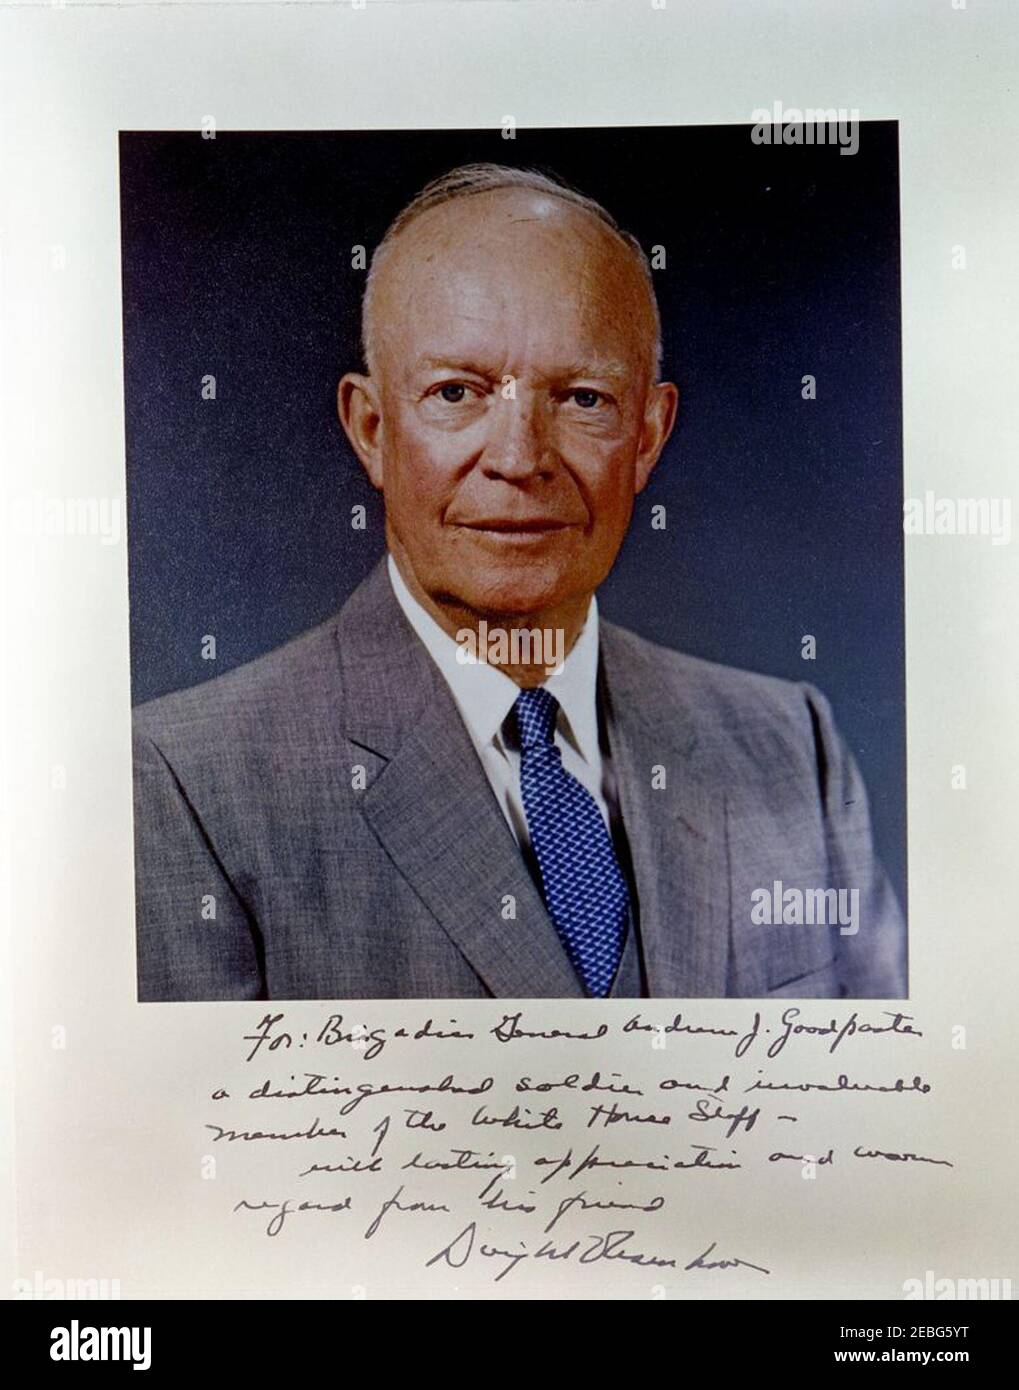 Portrait photo (copy) of President Dwight D. Eisenhower (DDE). Copy of portrait photo of President Dwight D. Eisenhower, autographed by Eisenhower. Inscription reads: u0022For: Brigadier General Andrew J. Goodpaster a distinguished soldier and invaluable member of the White House Staff u2013 with lasting appreciation and warm regard from his friend Dwight Eisenhower.u0022 [Photograph by Harold Sellers] Stock Photo